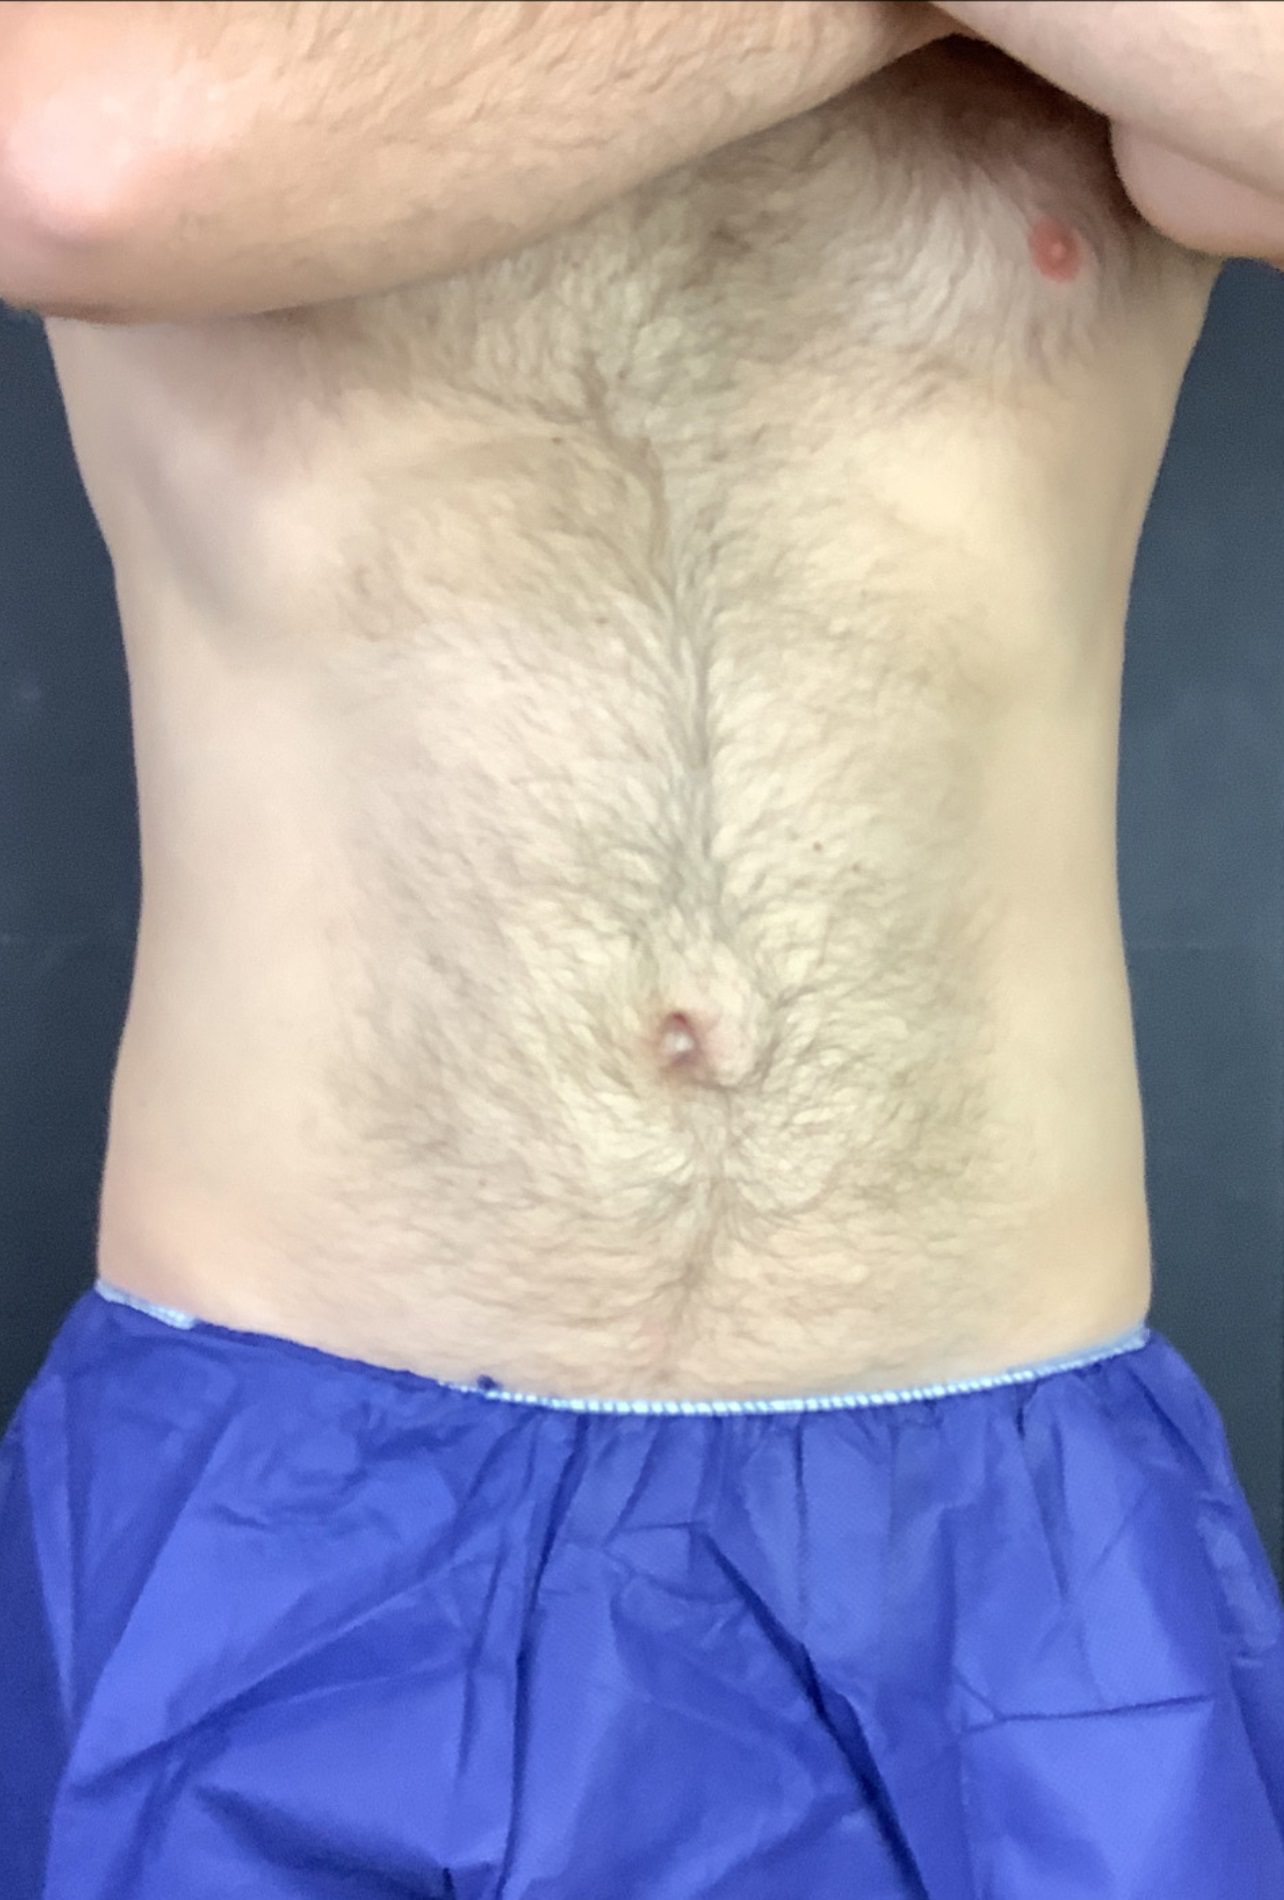 coolsculpting fat freezing flanks after